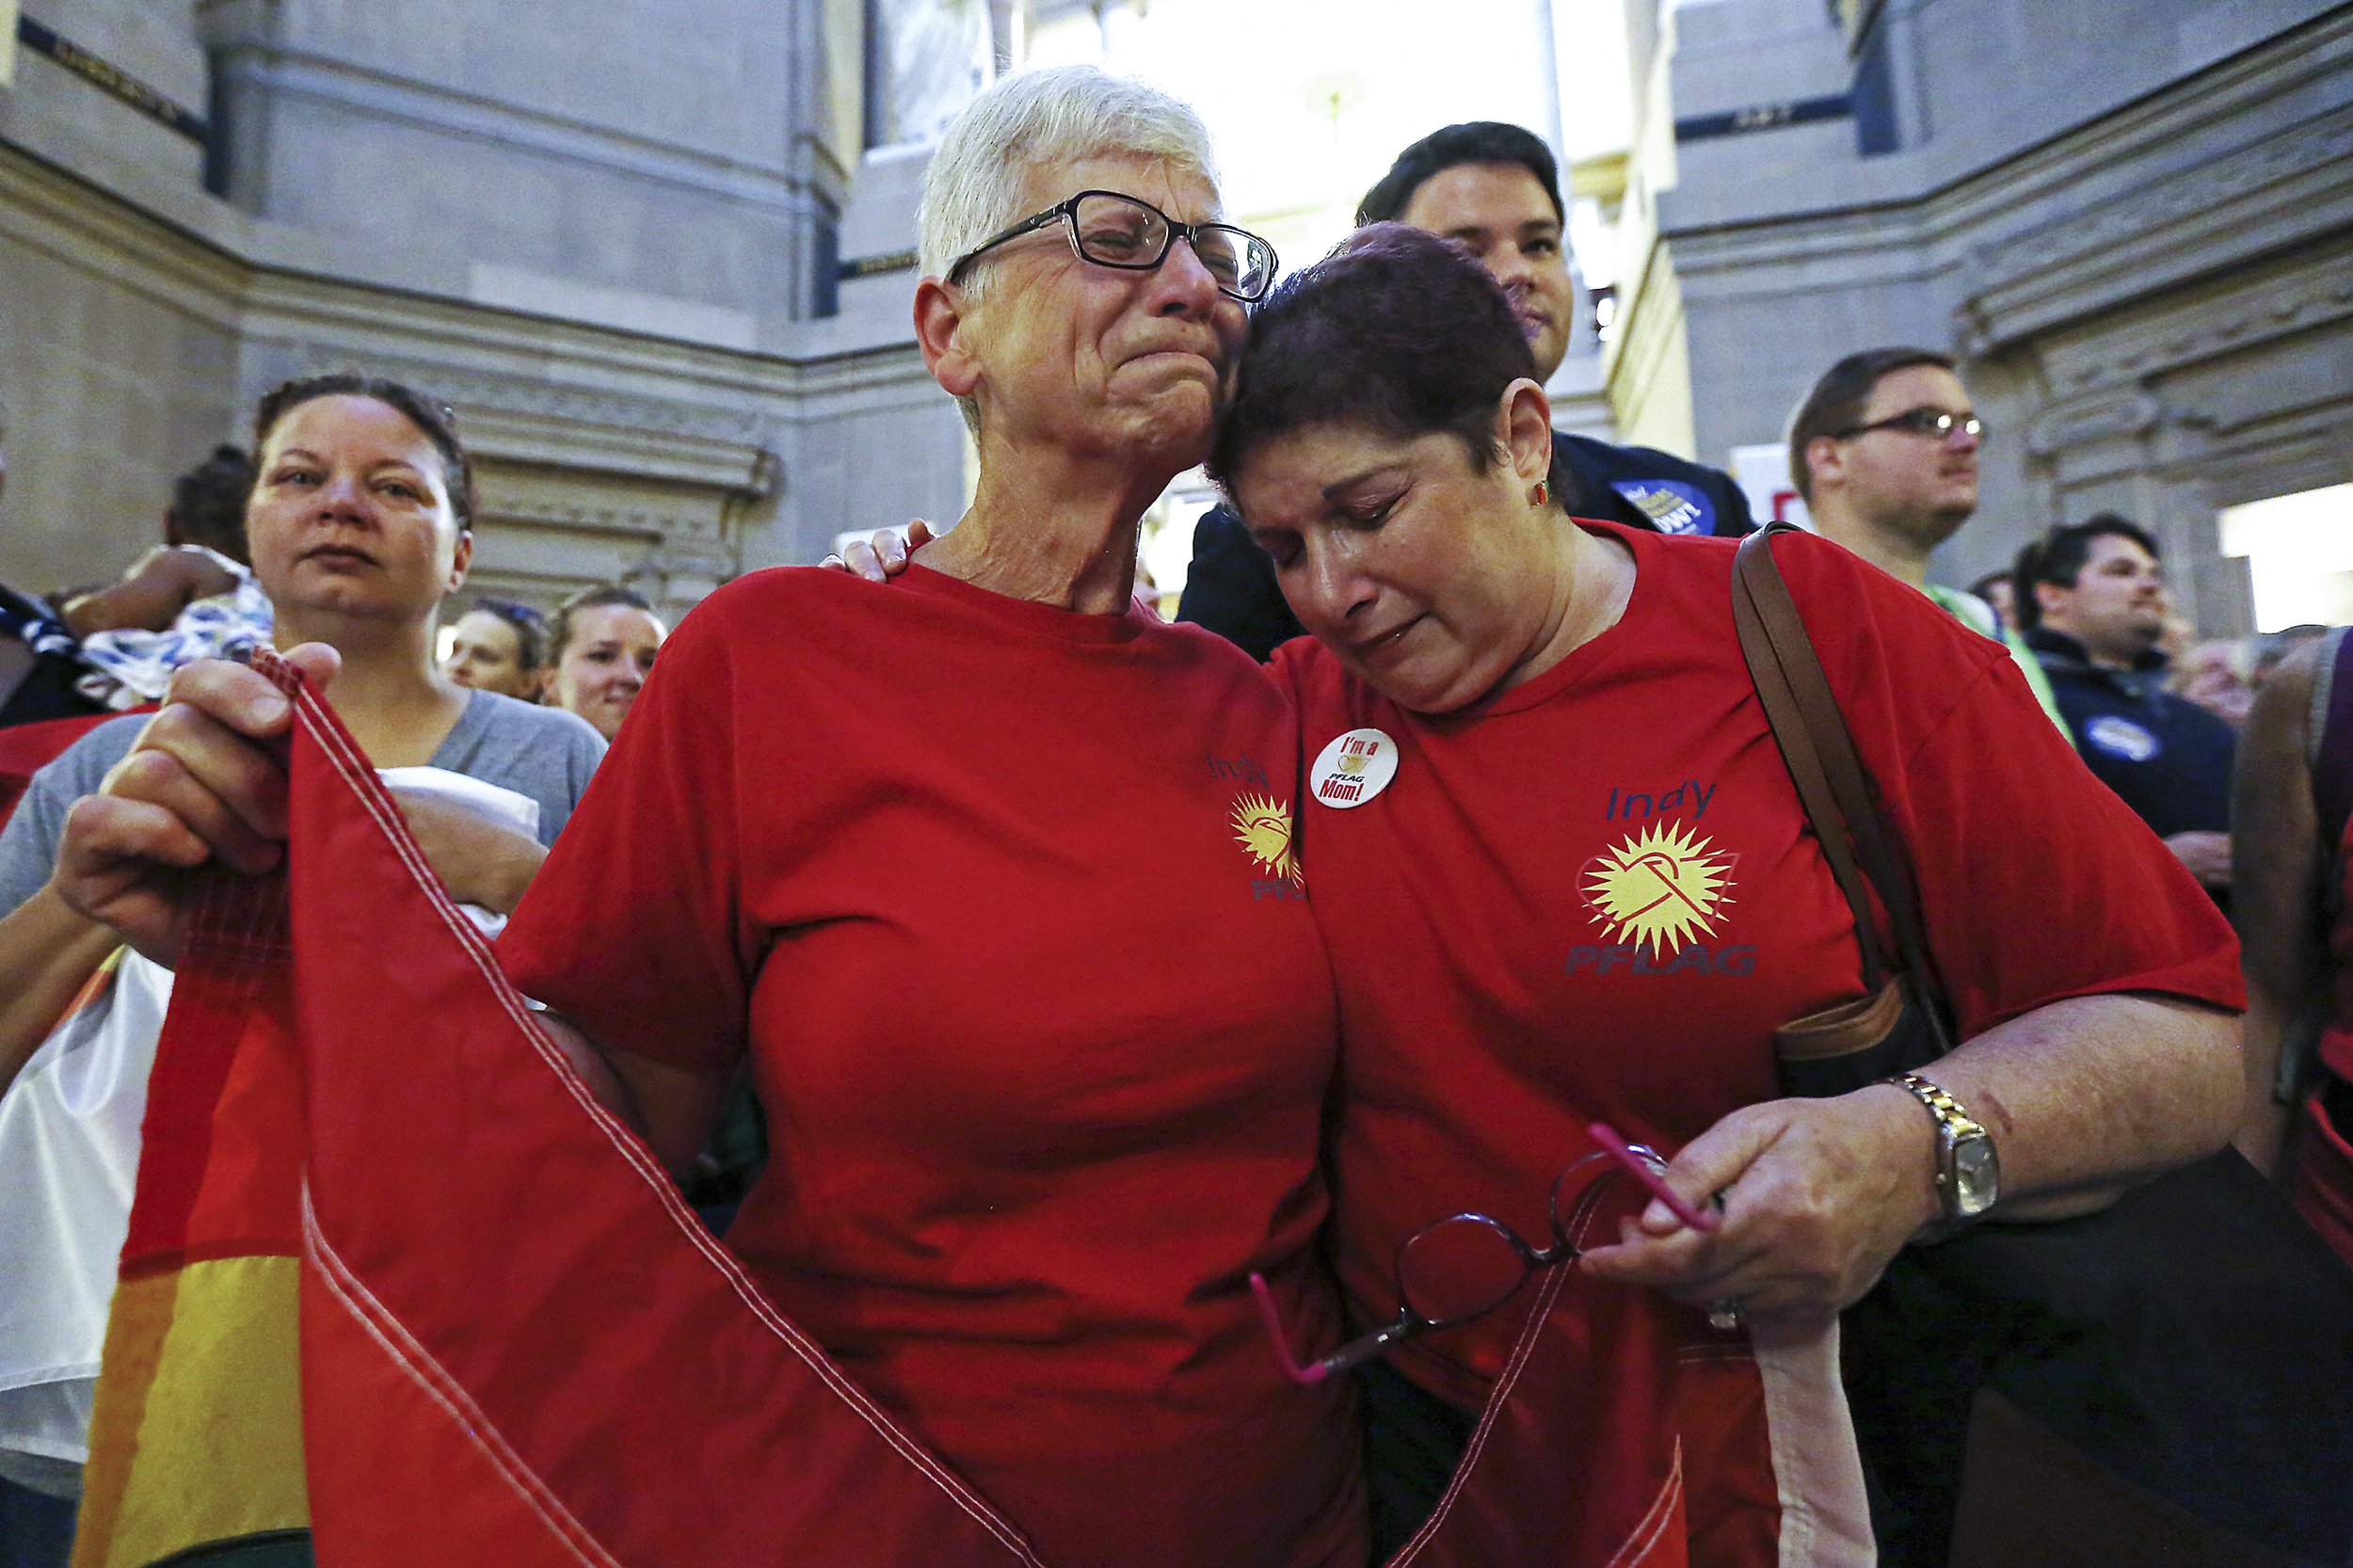  Betty Lynch and Annette Gross embrace during a rally celebrating the nationwide legality of same-sex marriage Friday, June 26, 2015, at the Statehouse in Indianapolis. Lynch and Gross both have gay sons who will now be able to marry in any state. 